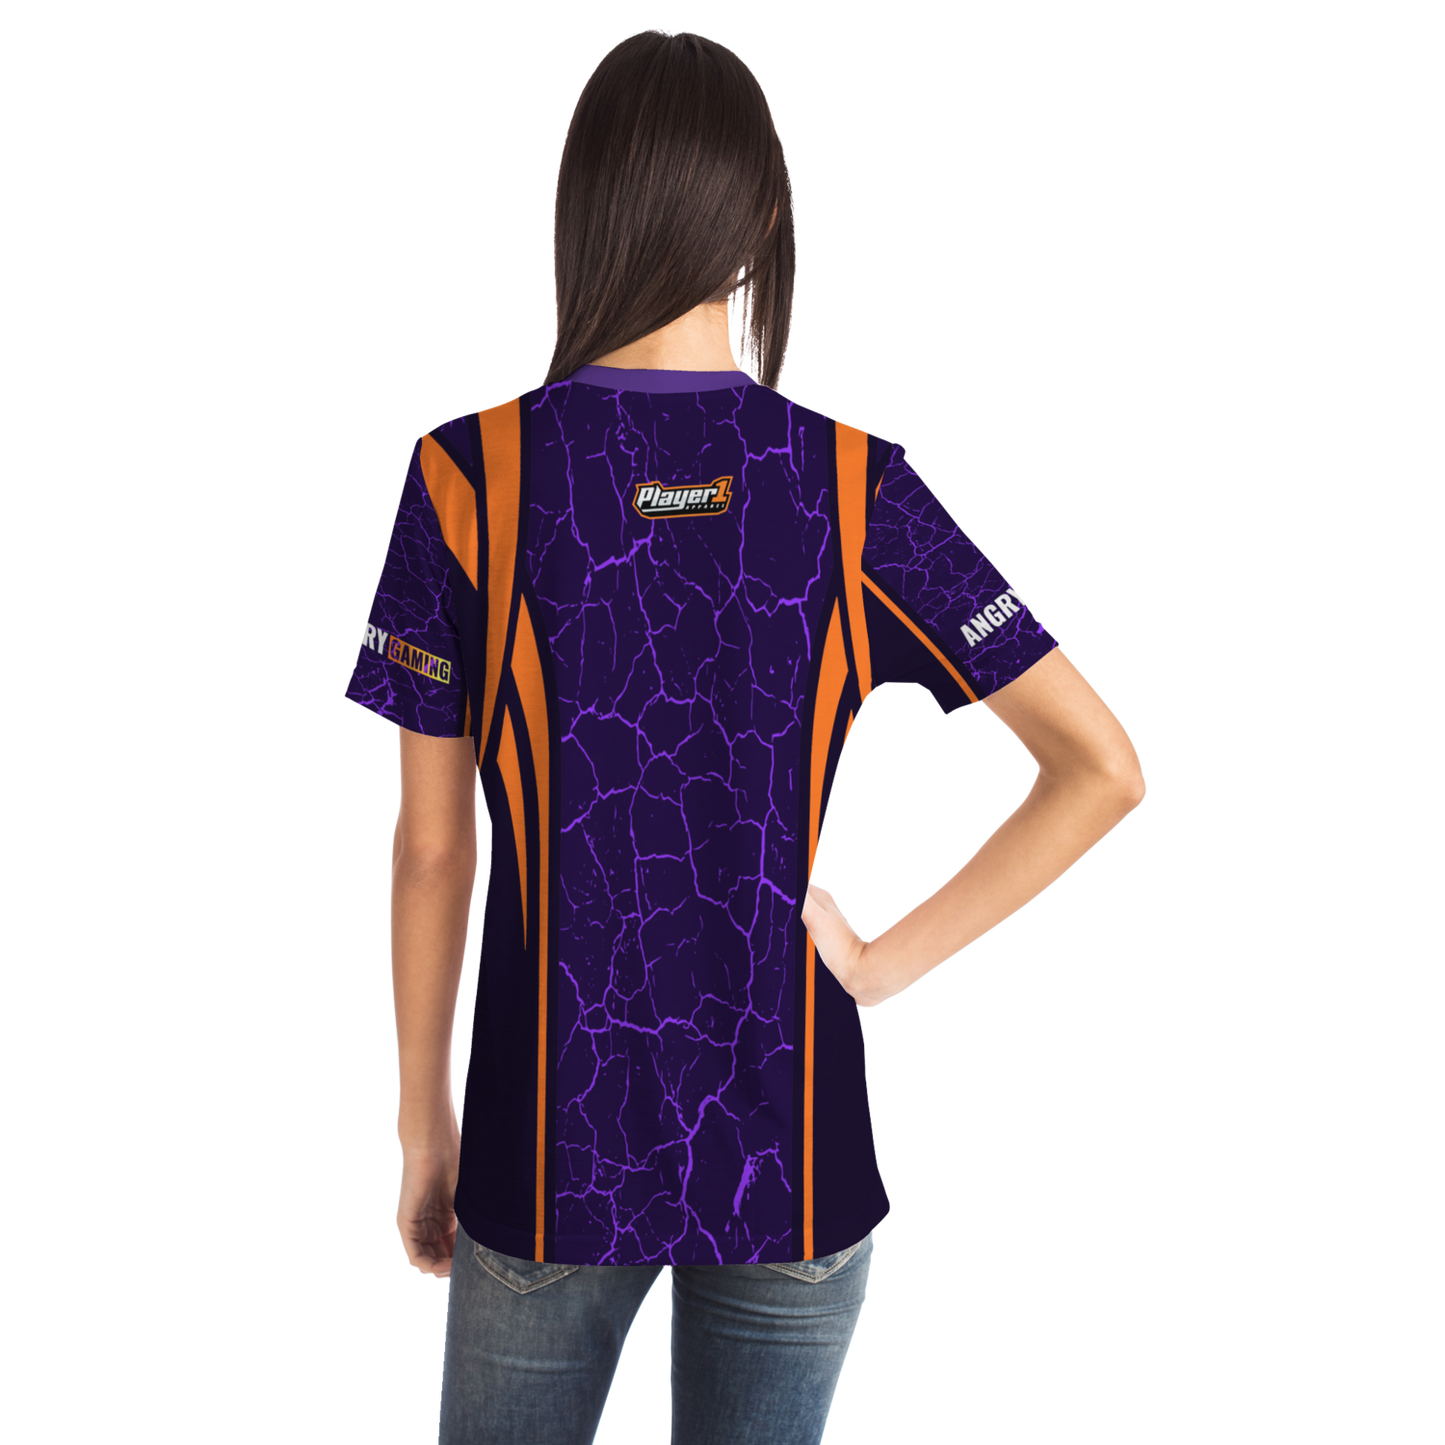 Angry Gaming Pro Jersey